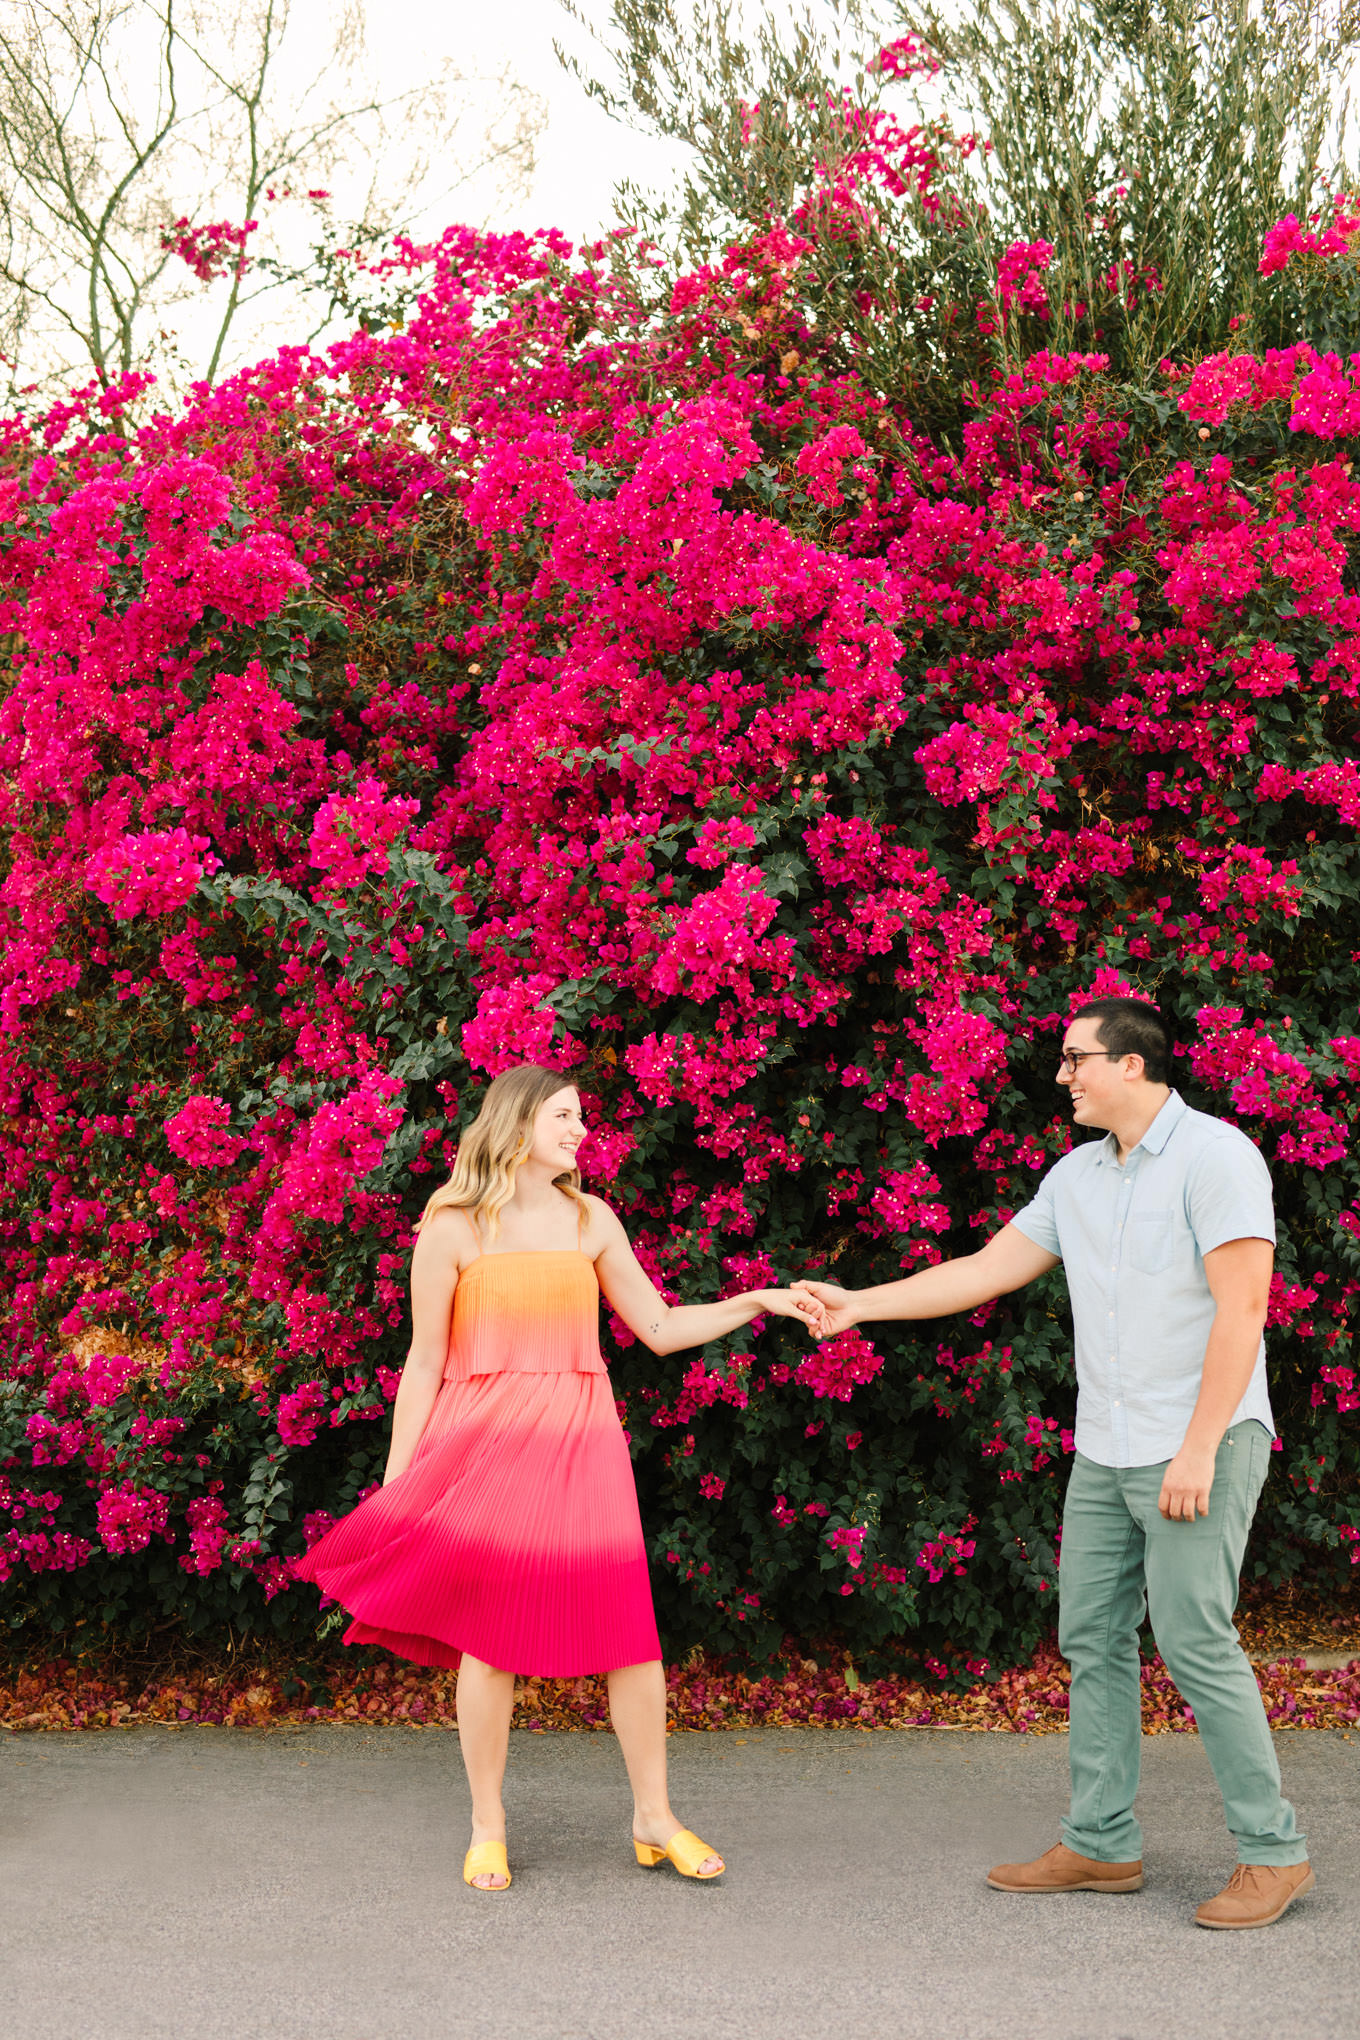 Palm Springs engagement session with bougainvillea | Engagement, elopement, and wedding photography roundup of Mary Costa’s favorite images from 2020 | Colorful and elevated photography for fun-loving couples in Southern California | #2020wedding #elopement #weddingphoto #weddingphotography #microwedding   Source: Mary Costa Photography | Los Angeles